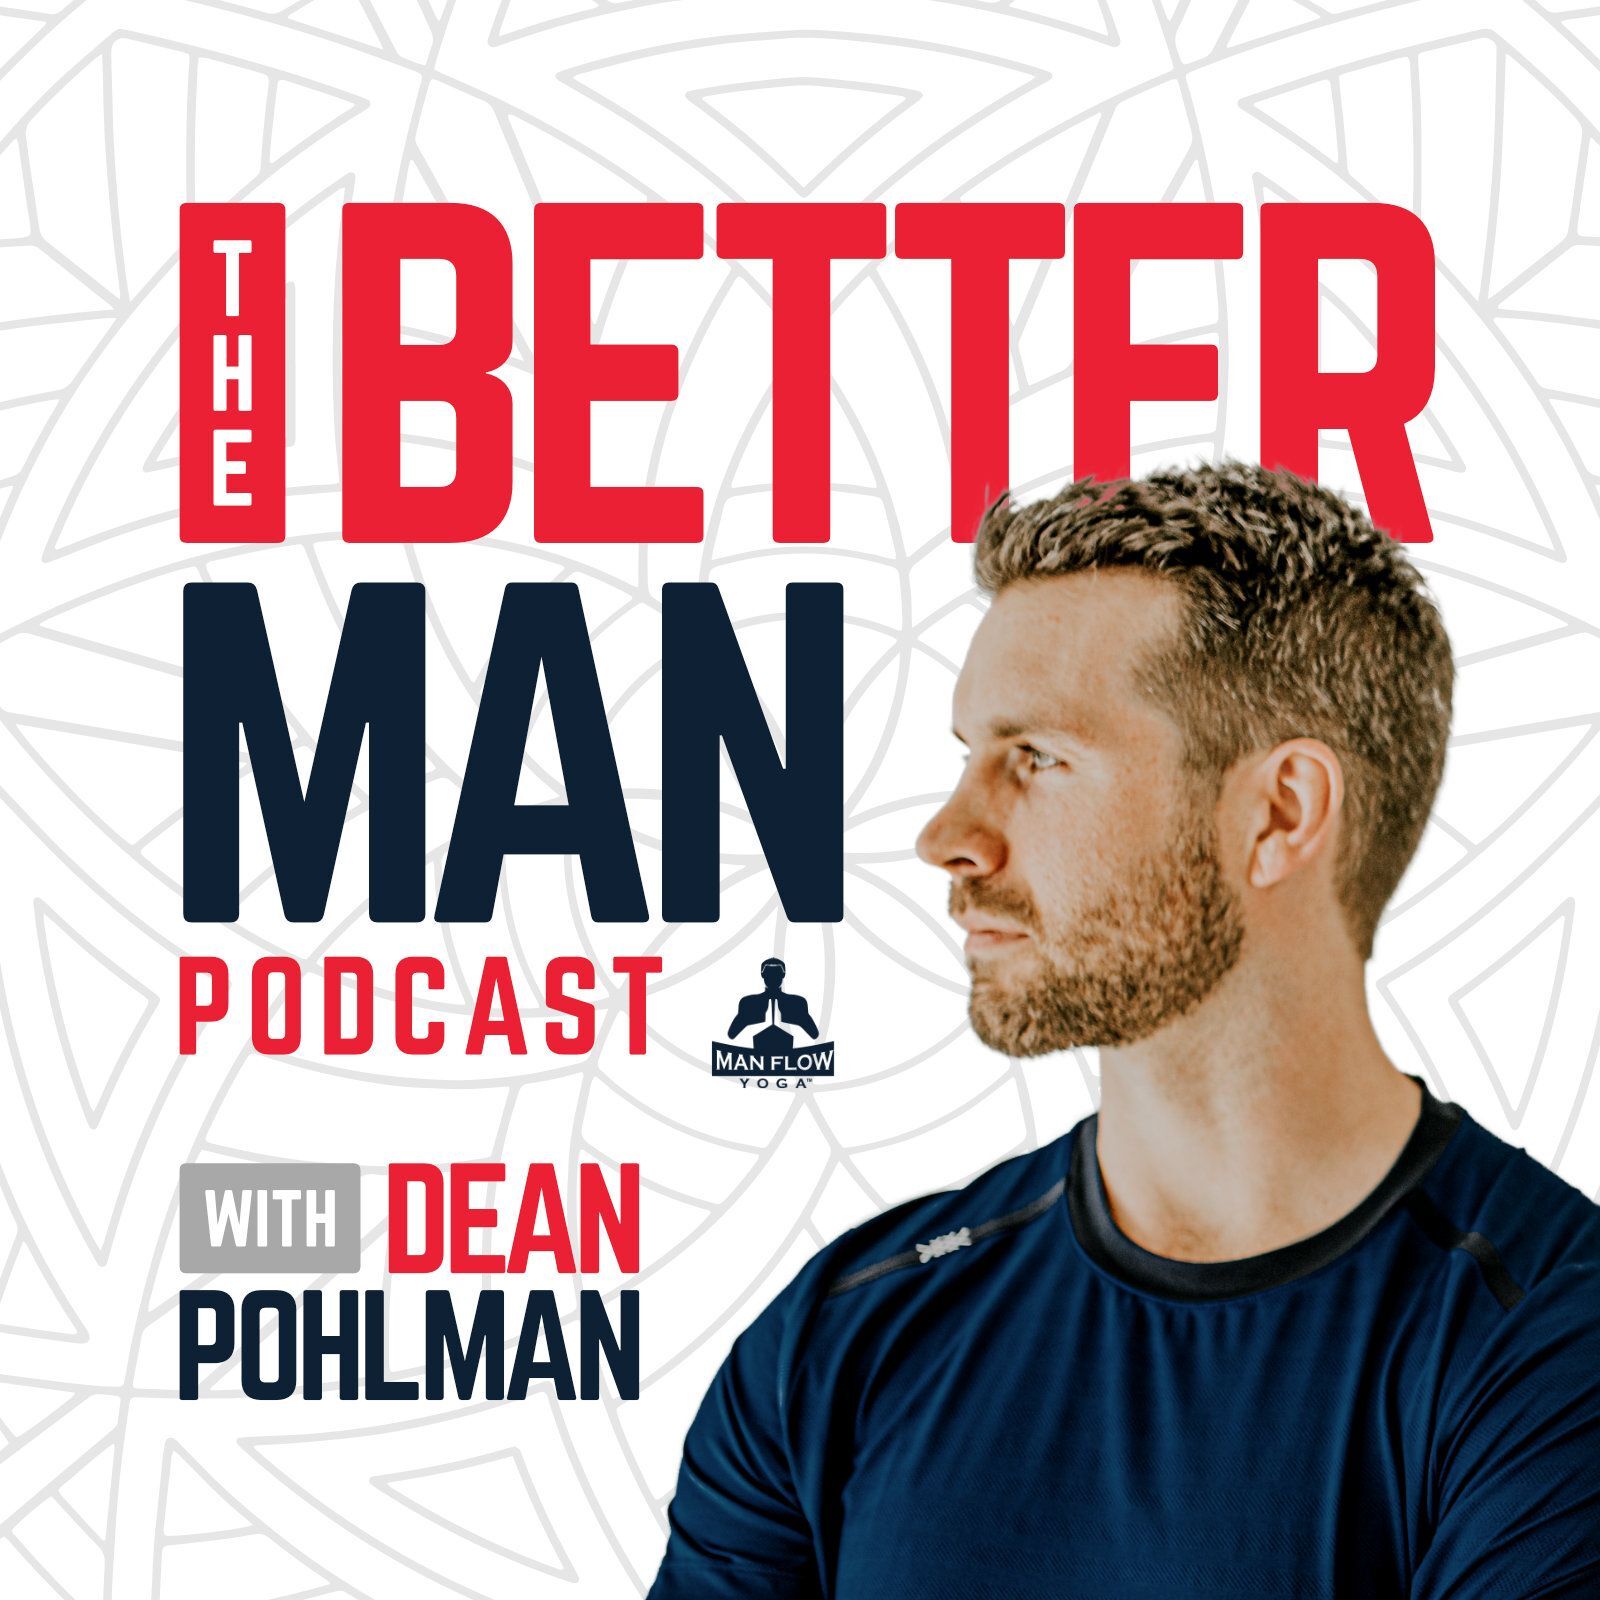  The Better Man Podcast Hosted by Dean, Founder of Man Flow Yoga